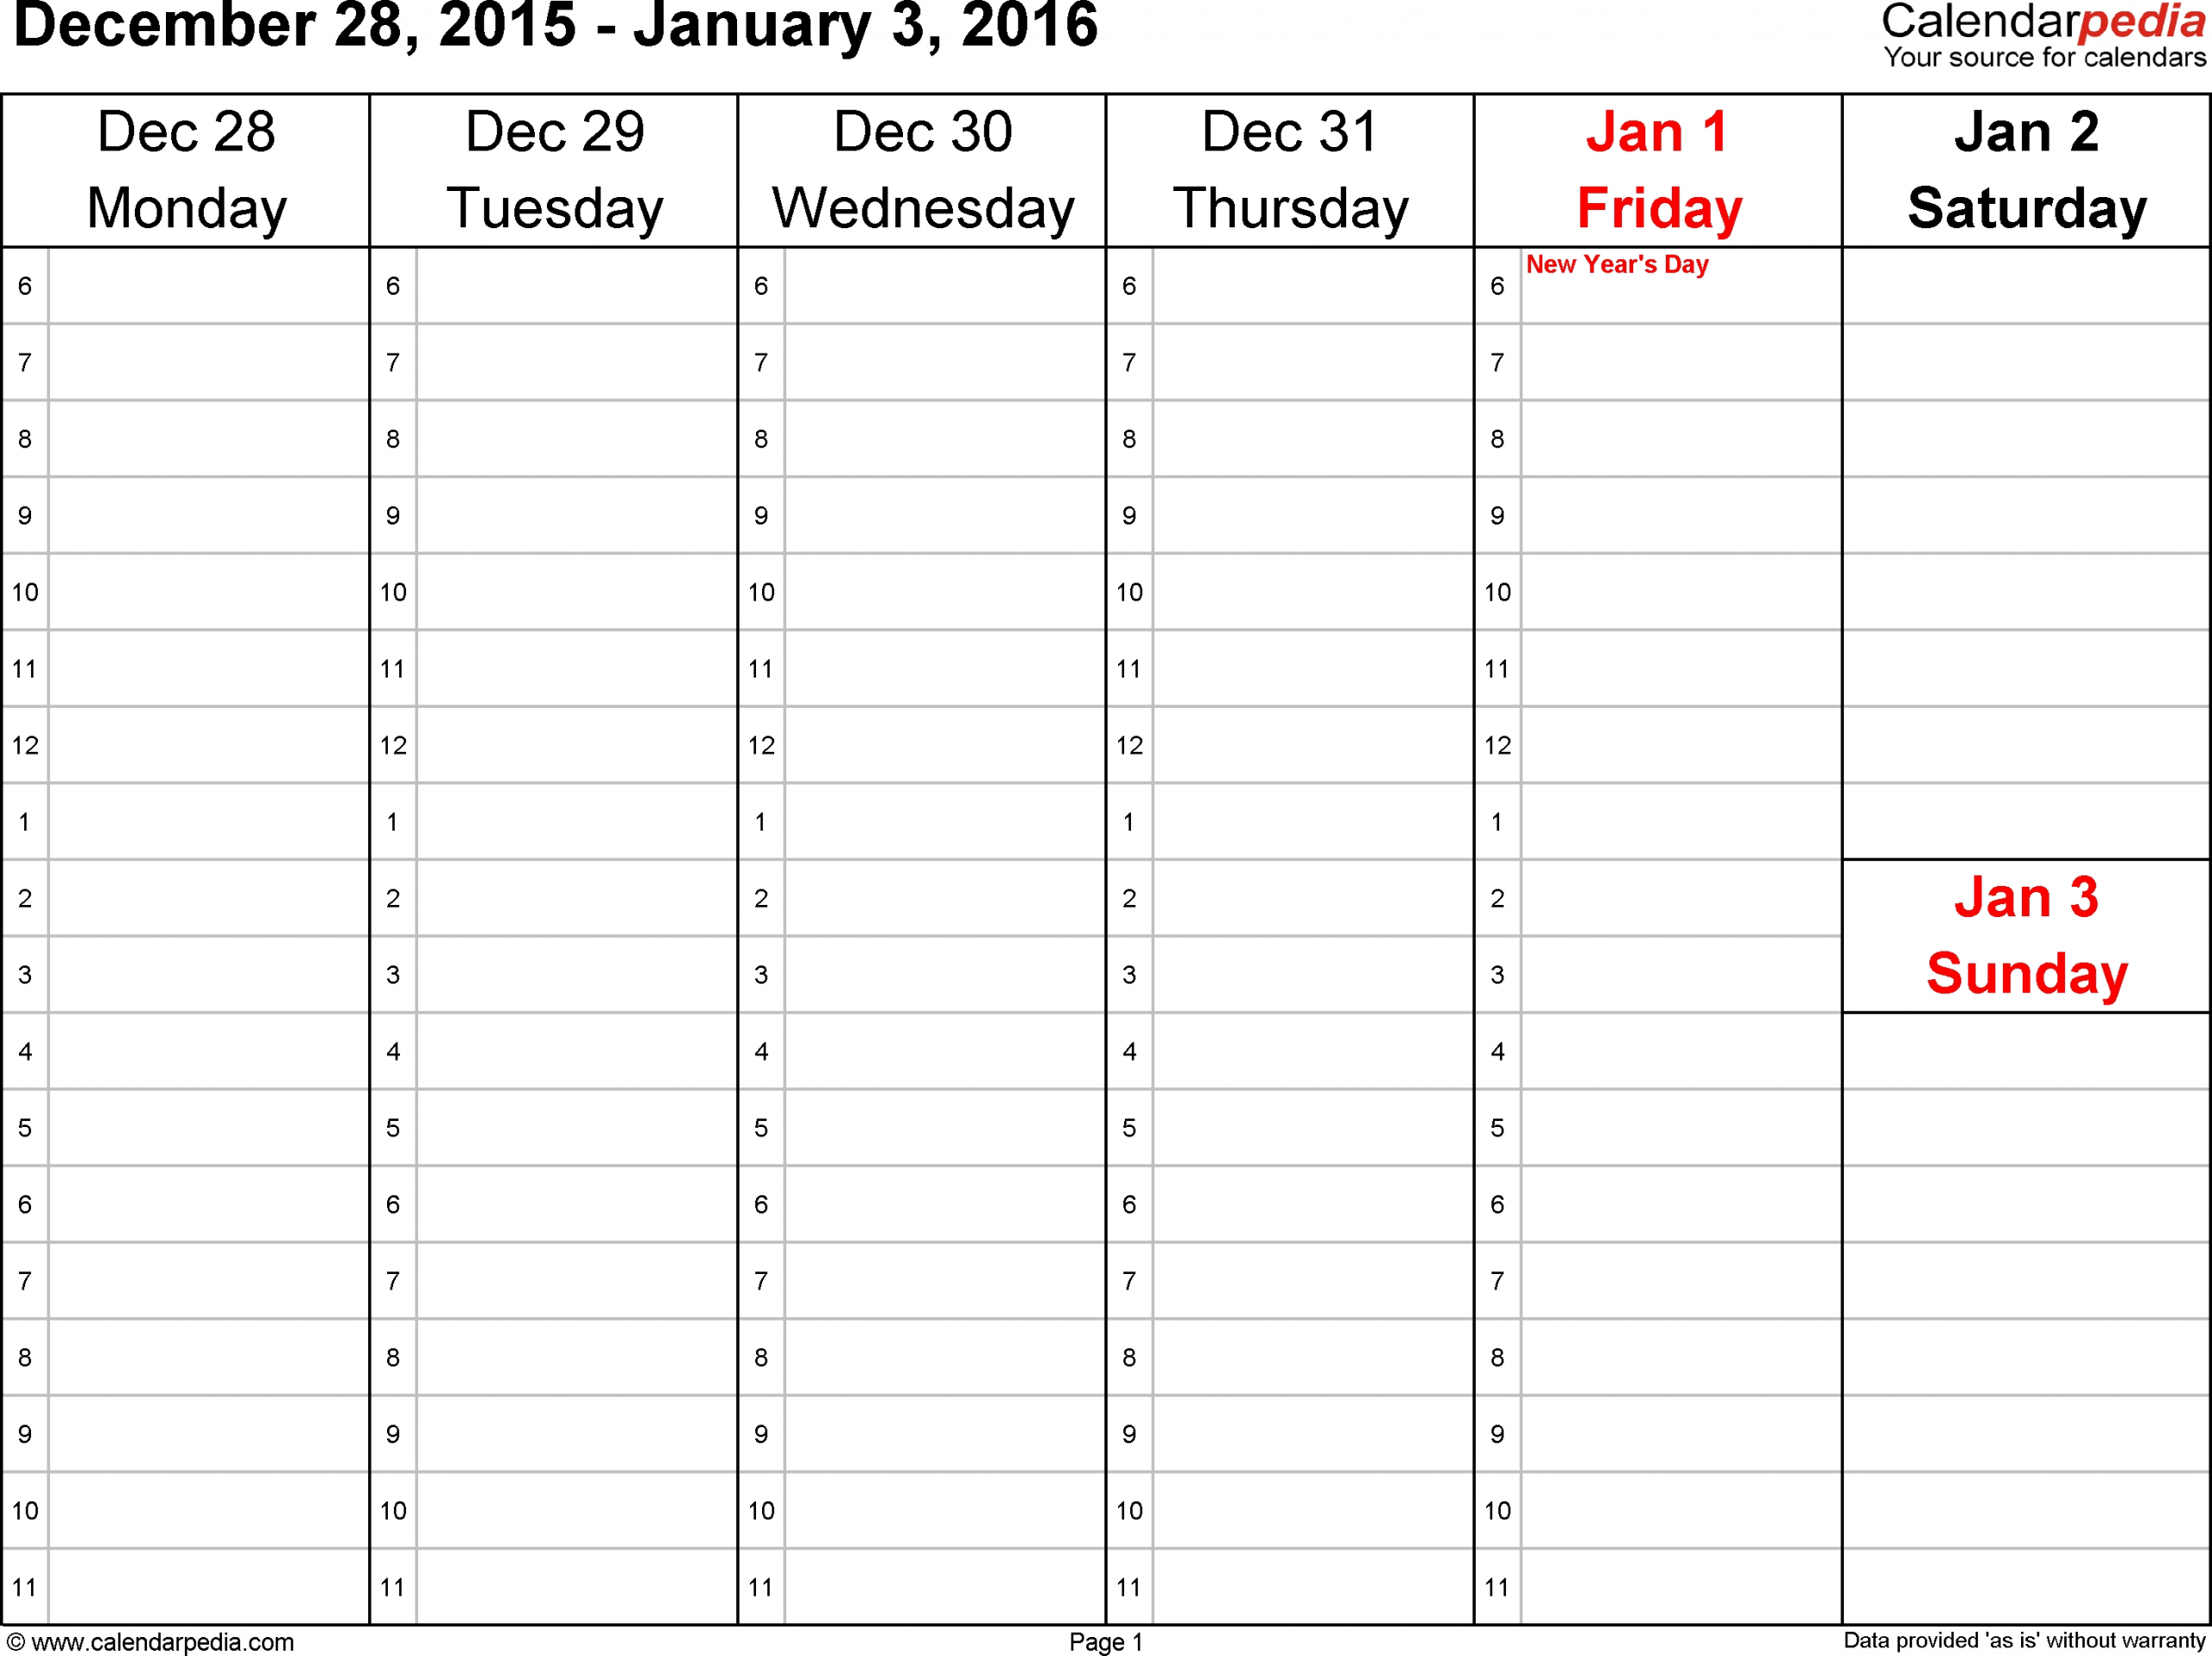 Weekly Calendars 2016 For Pdf - 12 Free Printable Templates